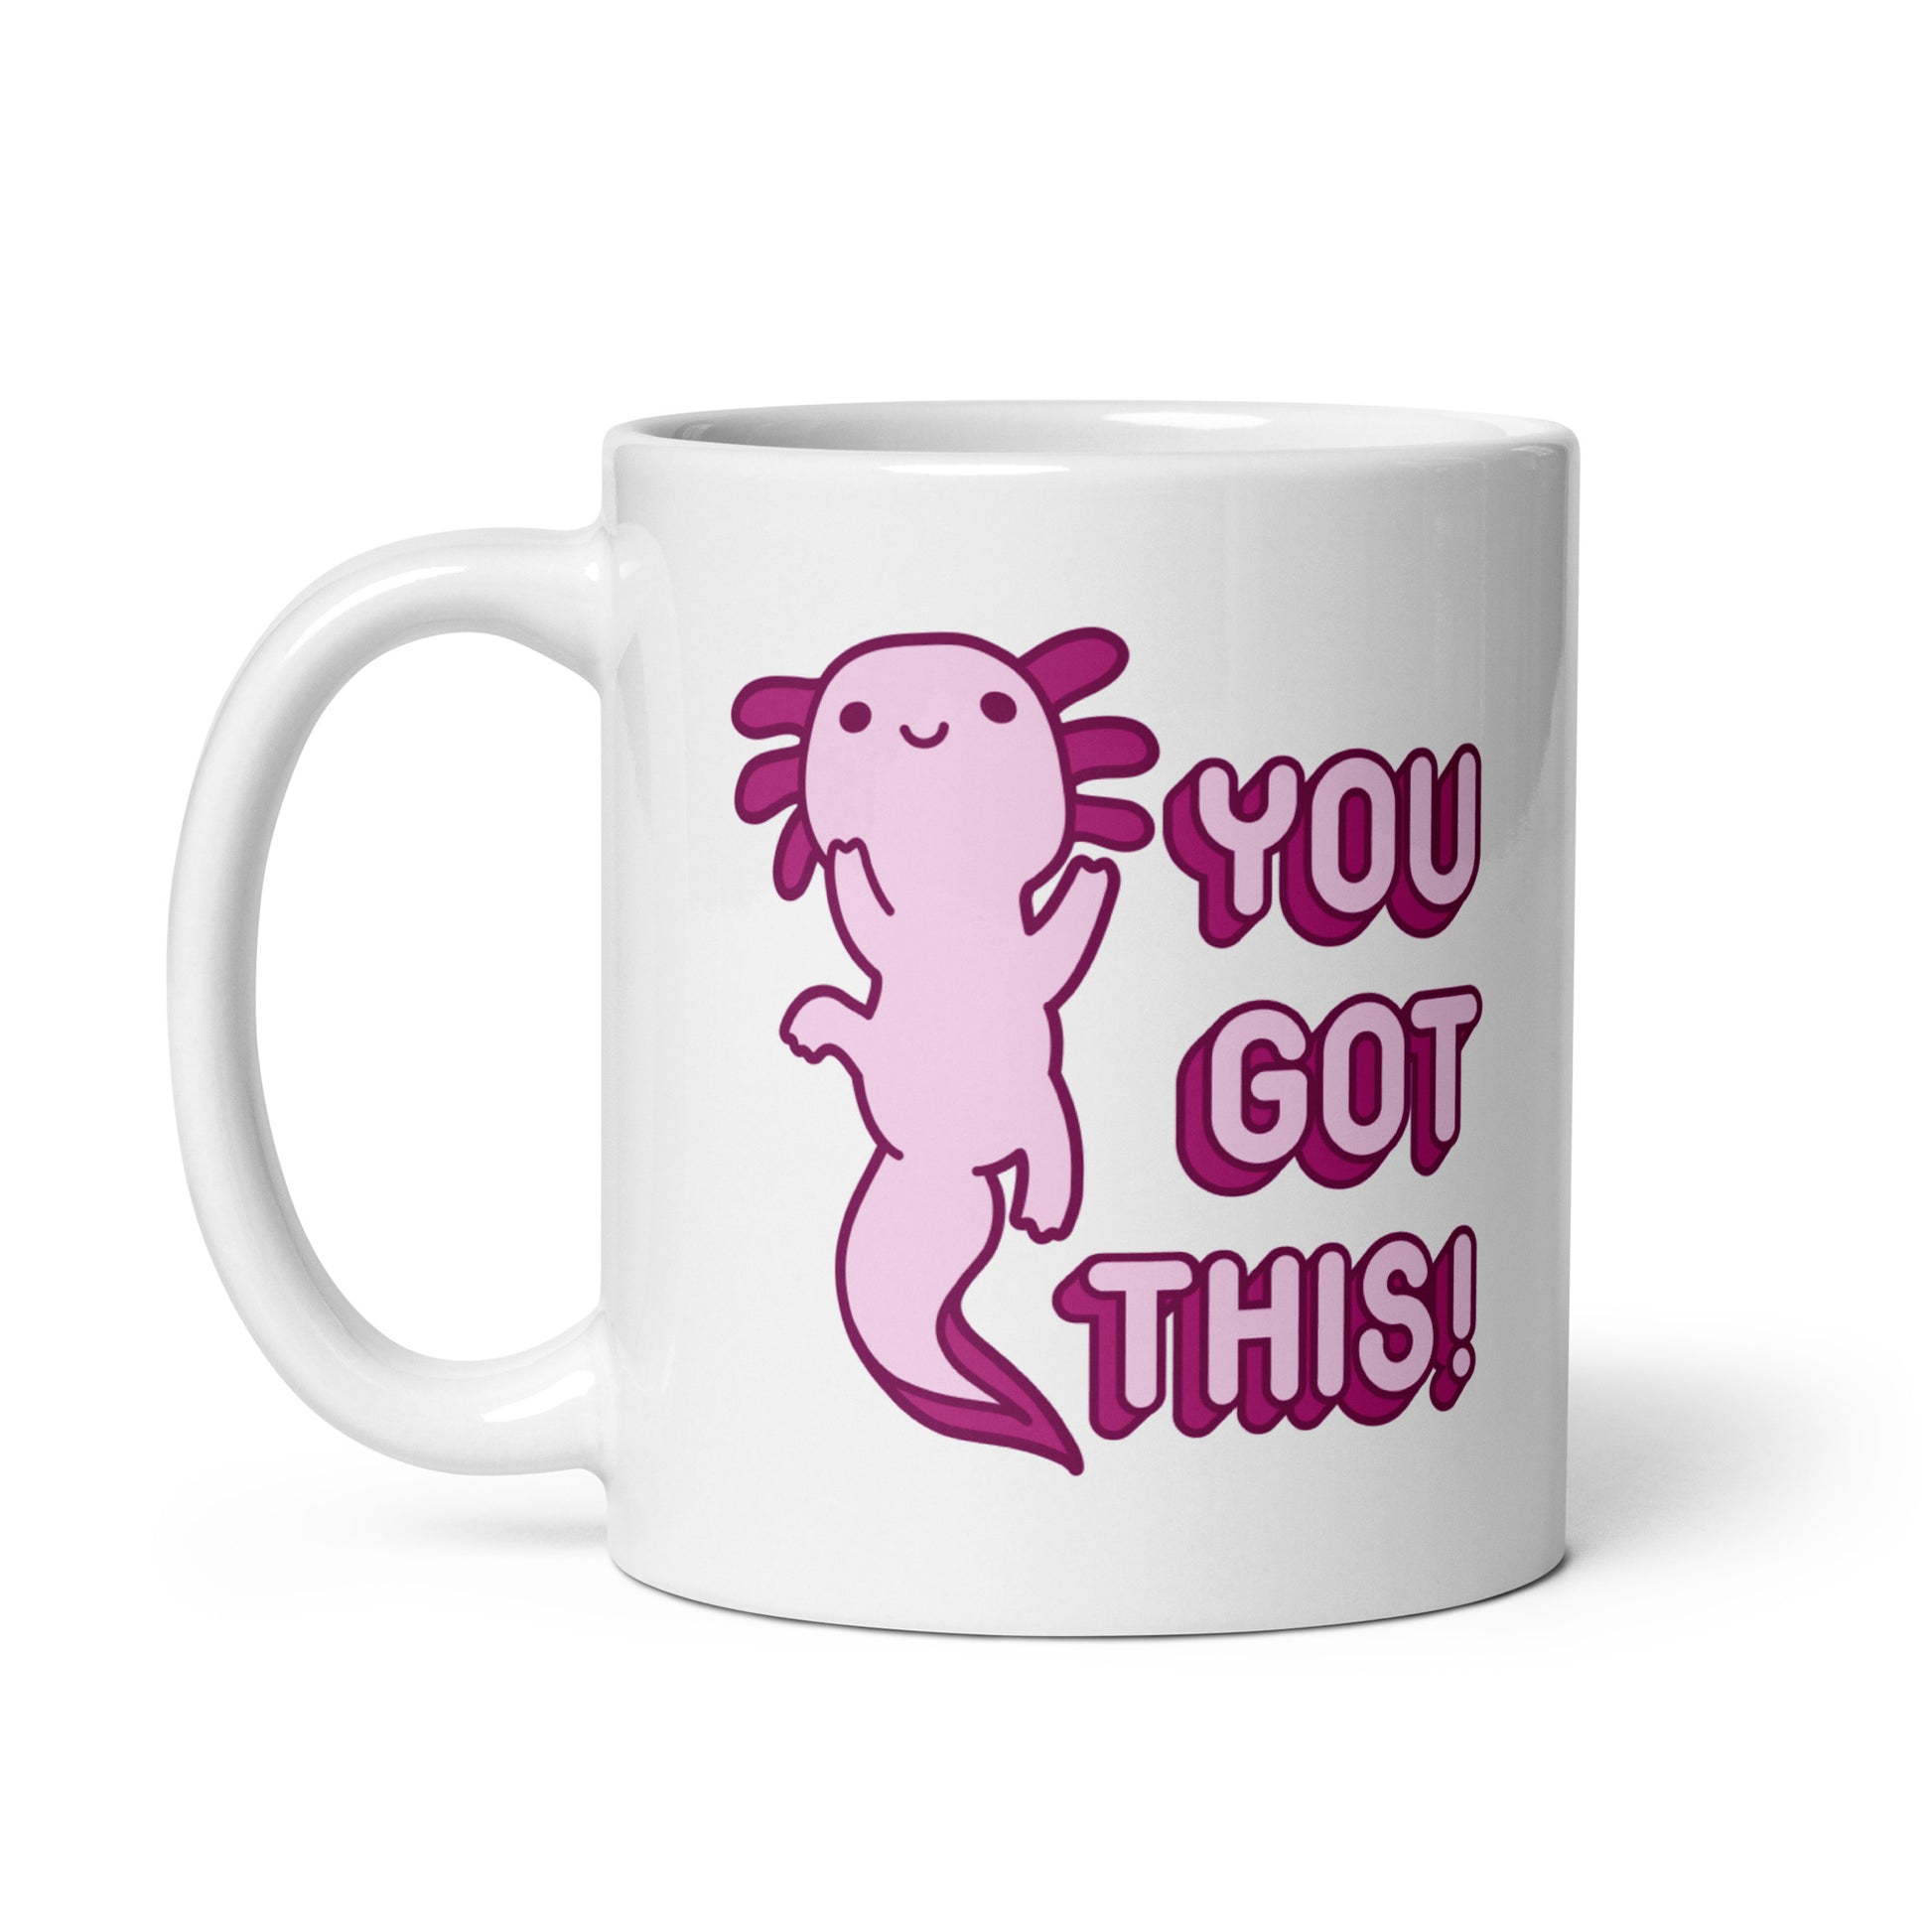 An 11oz white coffee mug with the handle on the left-hand side with a picture of a pink axolotl and the words "You Got This!" in pink bubble letters